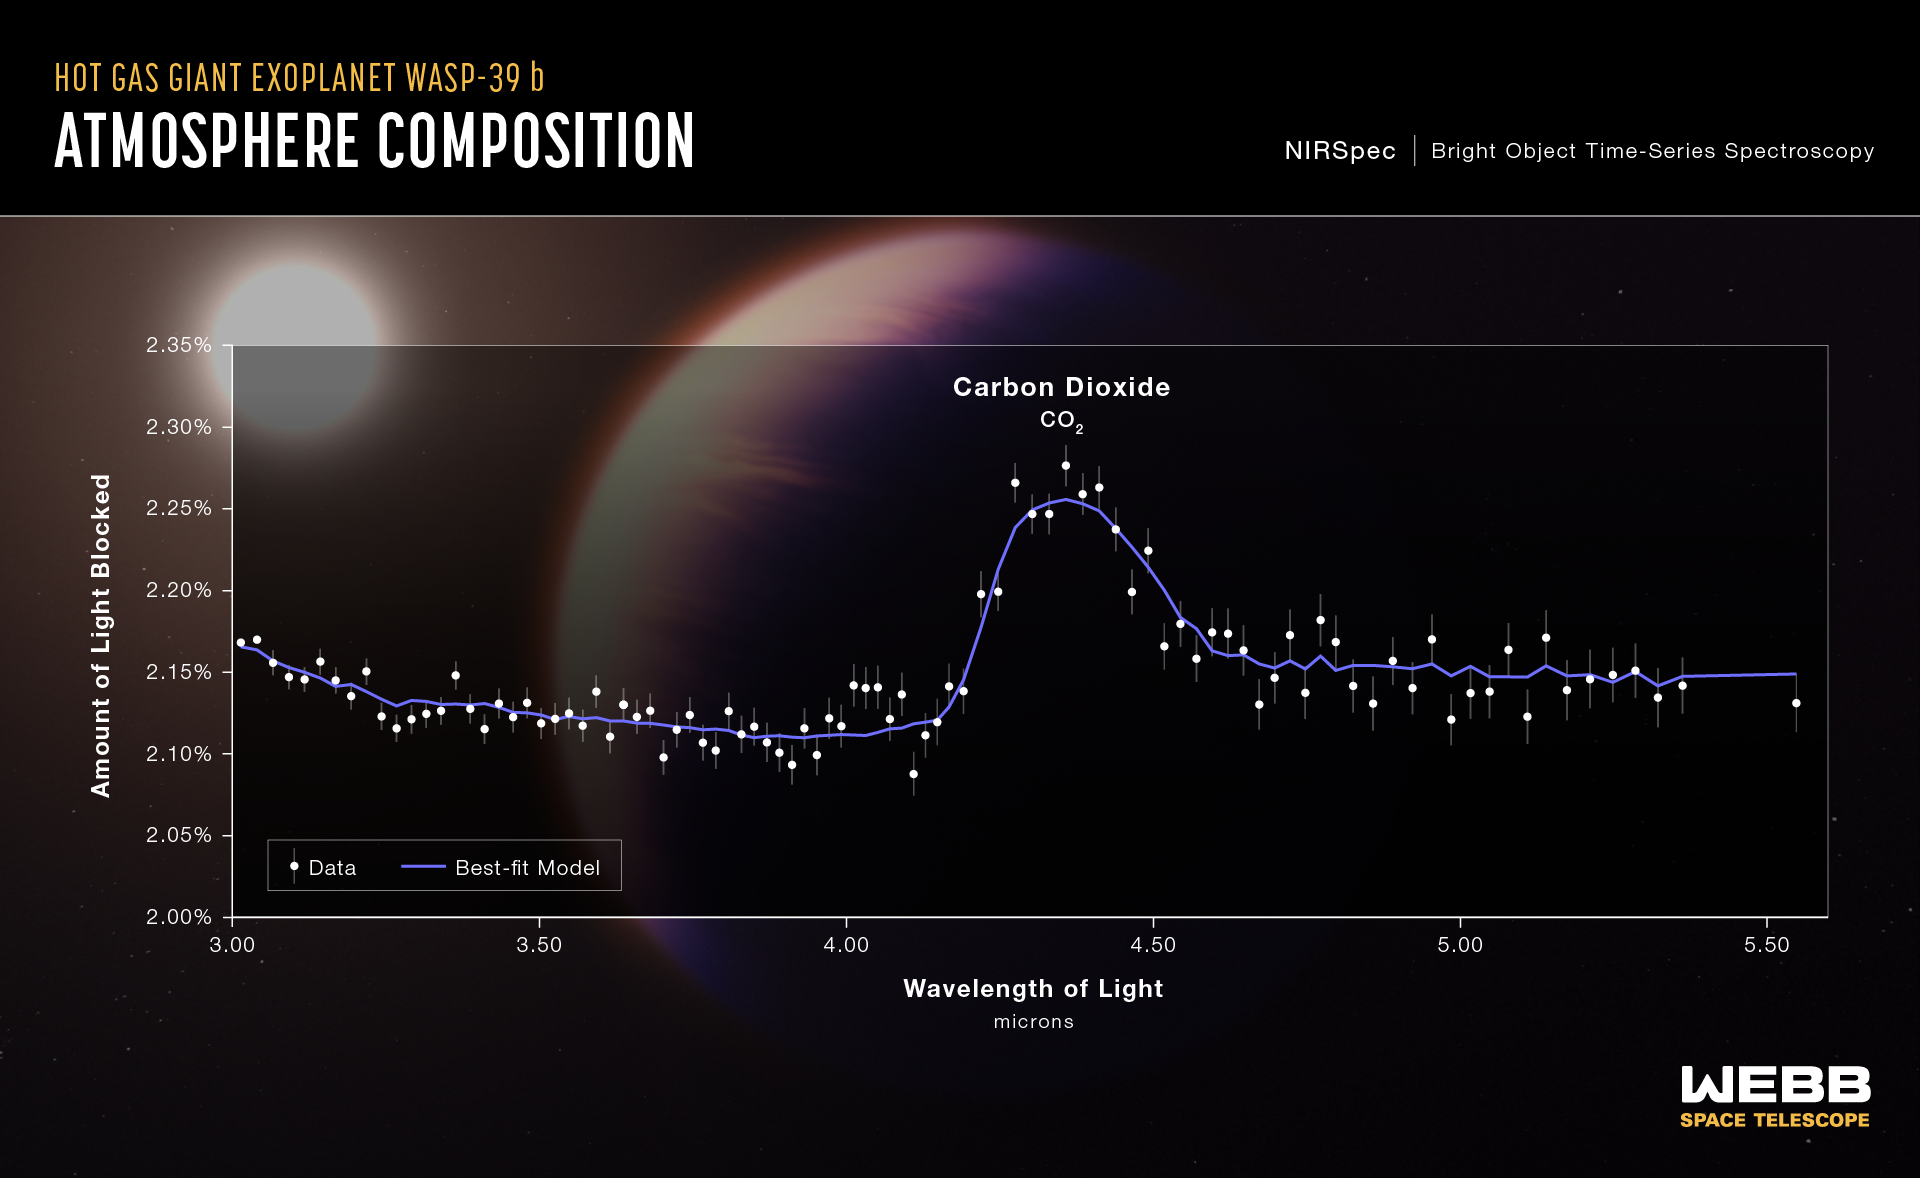 A transmission spectrum of the hot gas giant exoplanet WASP-39 b captured by JWST’s Near-Infrared Spectrograph (NIRSpec) on July 10, 2022, reveals the first clear evidence for carbon dioxide in a planet outside the solar system. This is also the first detailed exoplanet transmission spectrum ever captured that covers wavelengths between 3 and 5.5 microns.&nbsp;A transmission spectrum is made by comparing starlight filtered through a planet’s atmosphere as it moves in front of the star, to the unfiltered starlight detected when the planet is beside the star. Each of the 95 data points (white circles) on this graph represents the amount of a specific wavelength of light that is blocked by the planet and absorbed by its atmosphere. Wavelengths that are preferentially absorbed by the atmosphere appear as peaks in the transmission spectrum. The peak centered around 4.3 microns represents the light absorbed by carbon dioxide.&nbsp;The gray lines extending above and below each data point are error bars that show the uncertainty of each measurement, or the reasonable range of actual possible values. For a single observation, the error on these measurements is extremely small